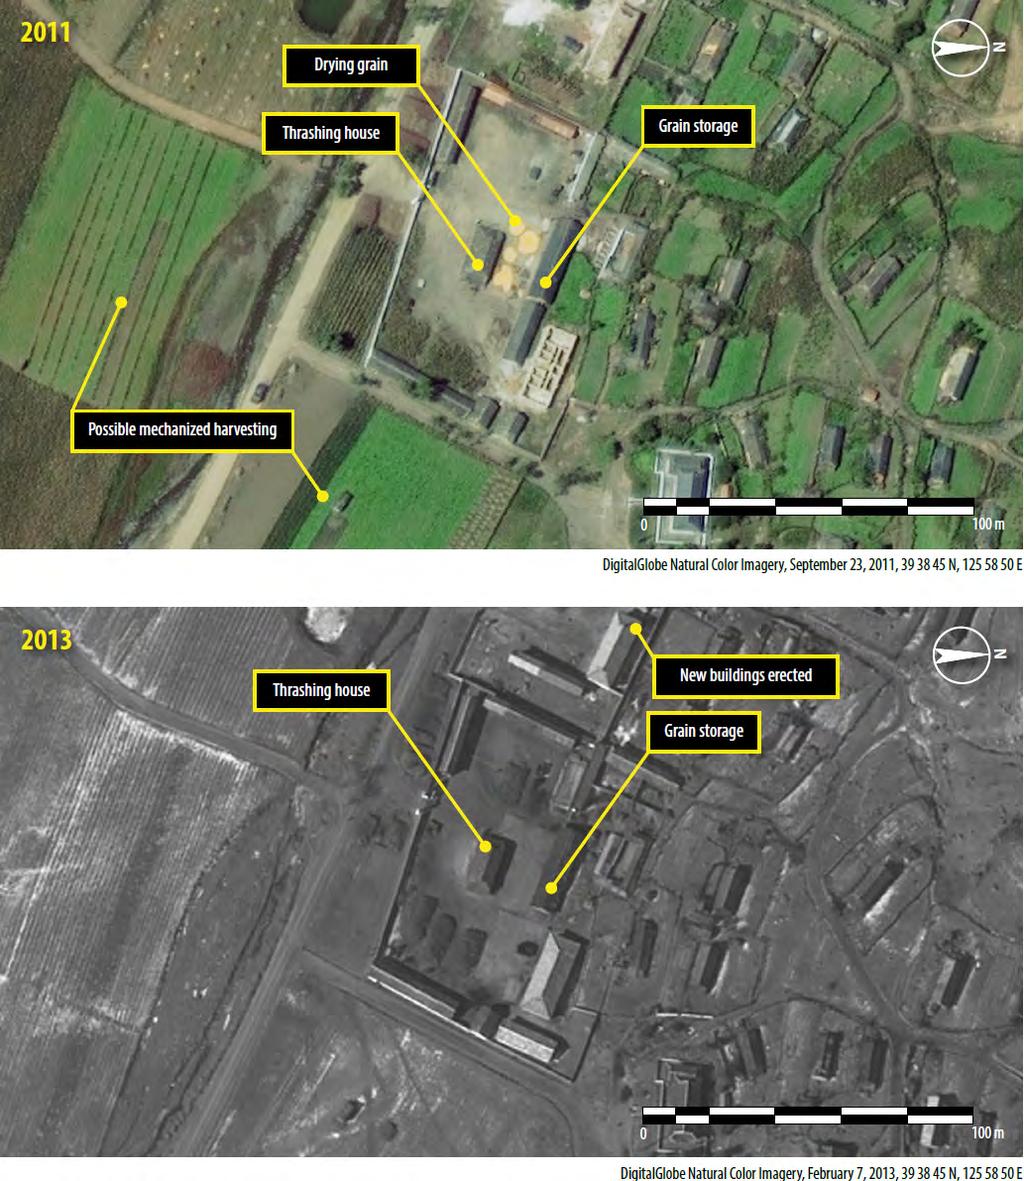 7 In imagery secured on 7 February, 2013, new buildings and a new gated facility were observed adjacent to